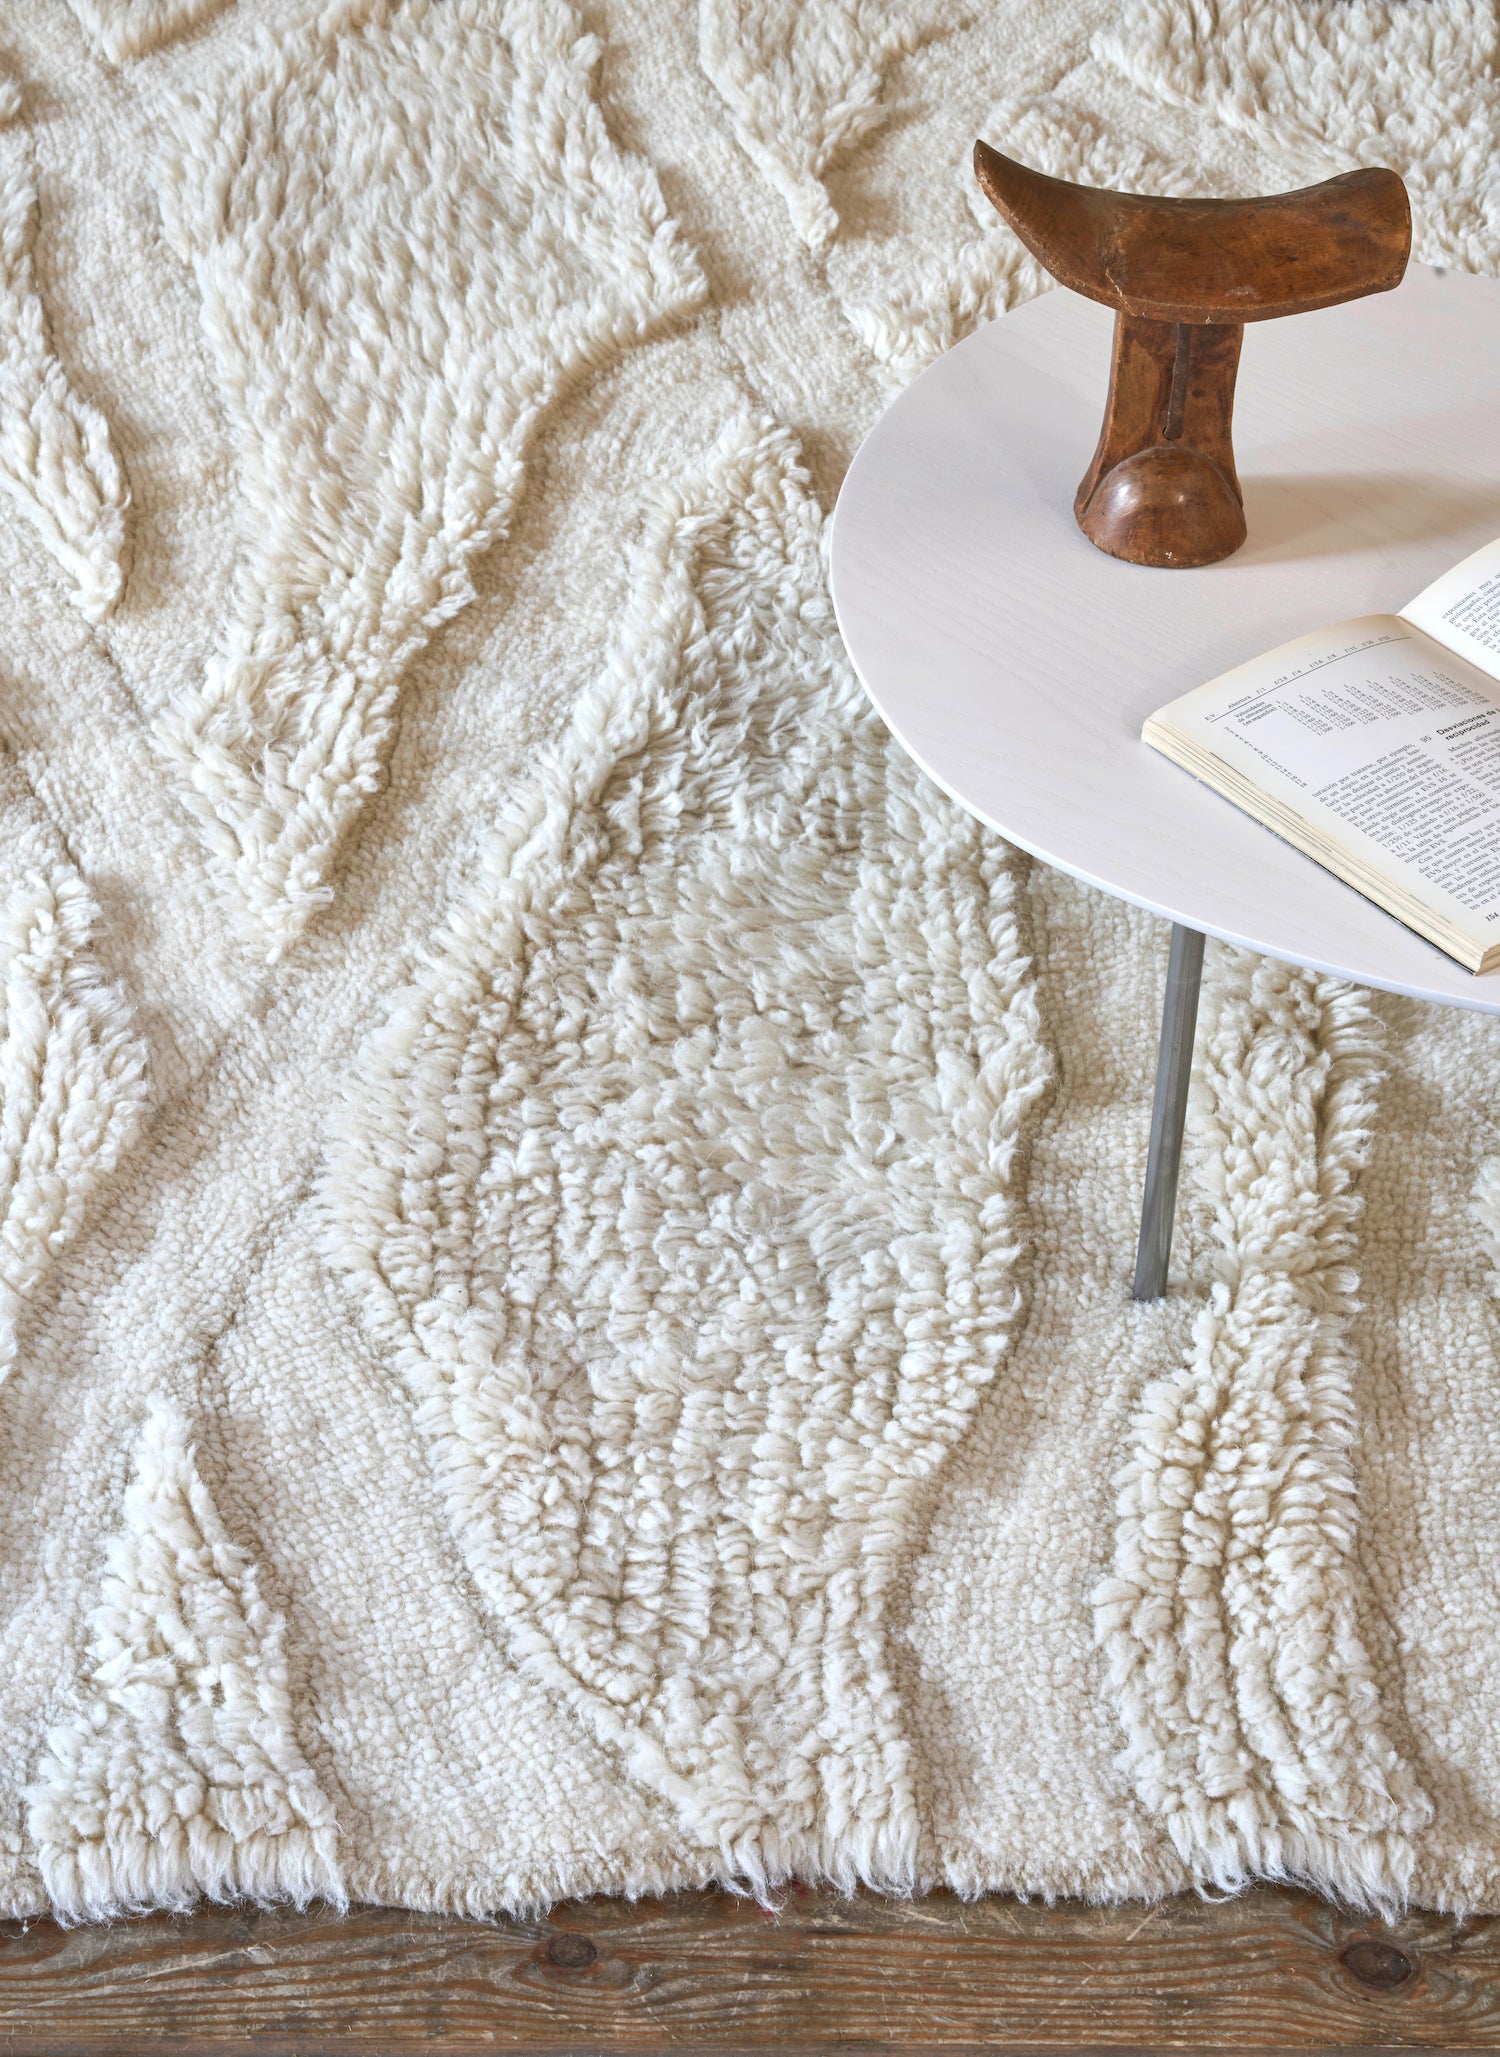 Woolable Rug Enkang. Inspired by the Maasai people, this textural rug adds extra coziness underfoot.